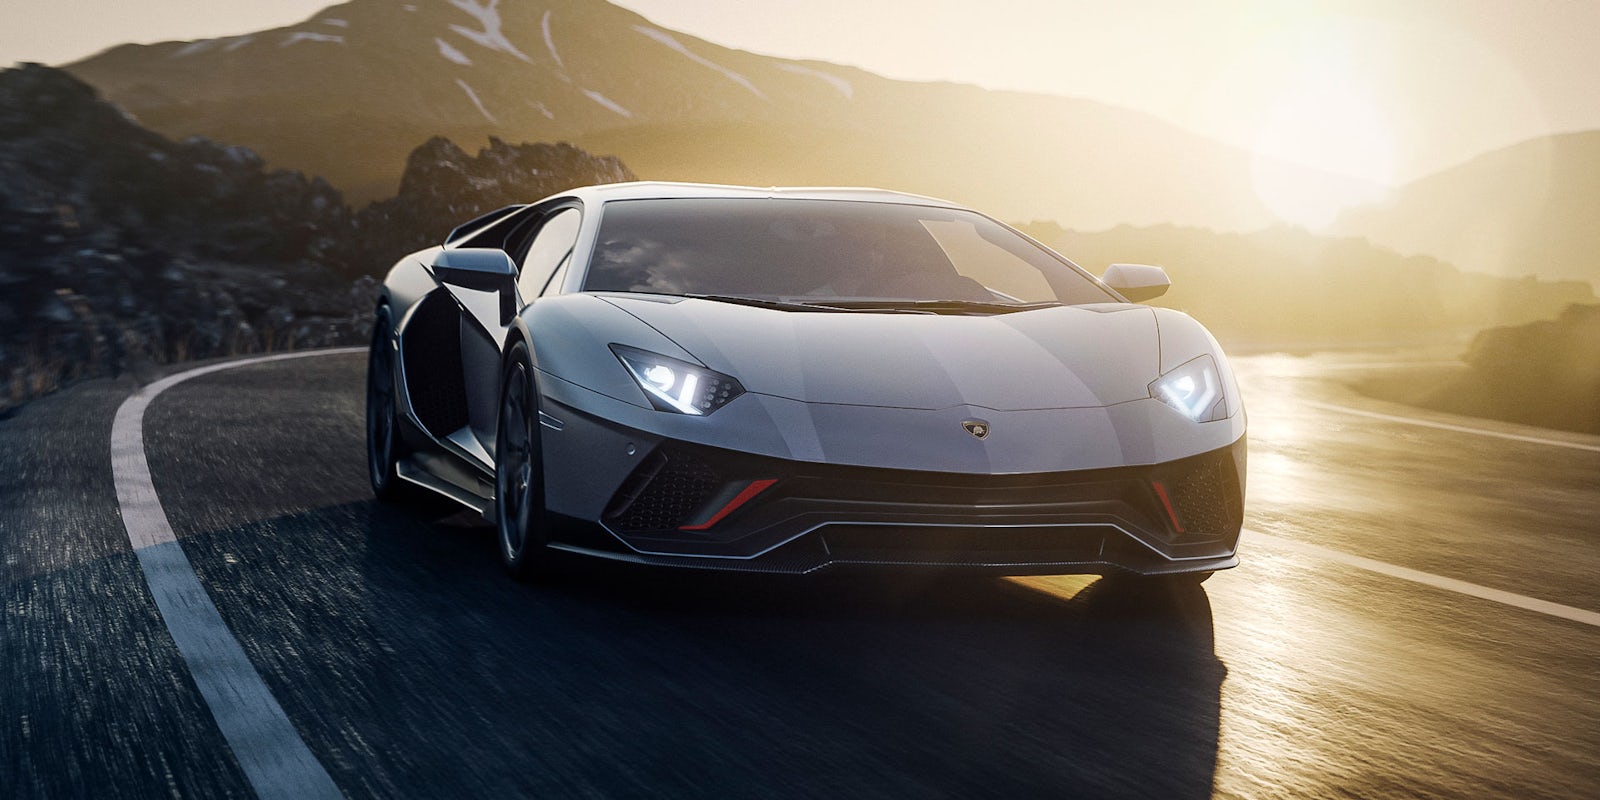 Aventador LP7804 Ultimae revealed price, specs and